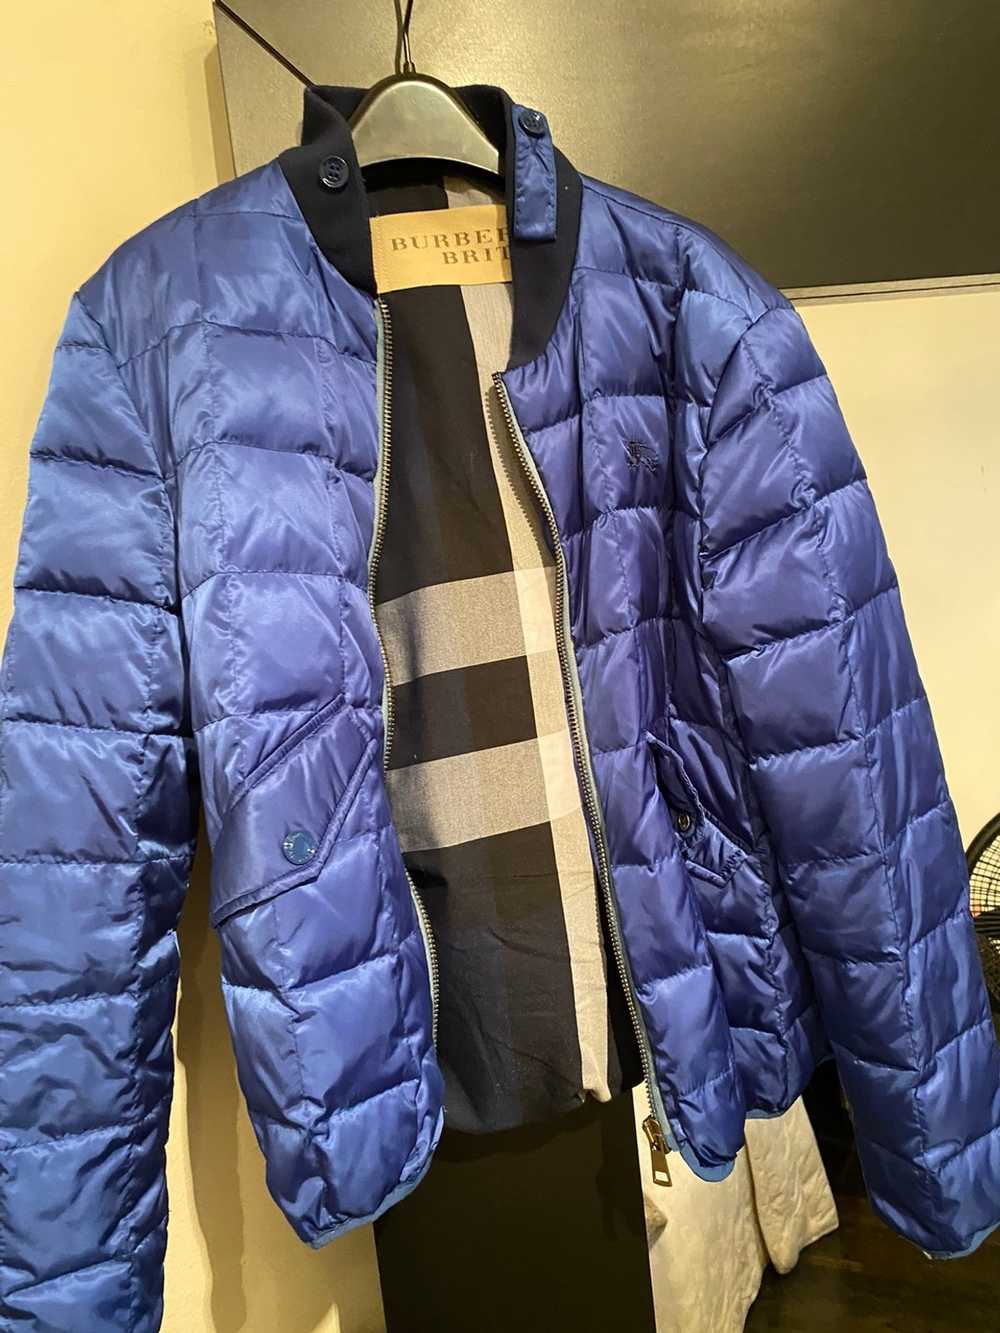 Burberry Burberry Royal Blue Quilted Bomber Jacket - image 1